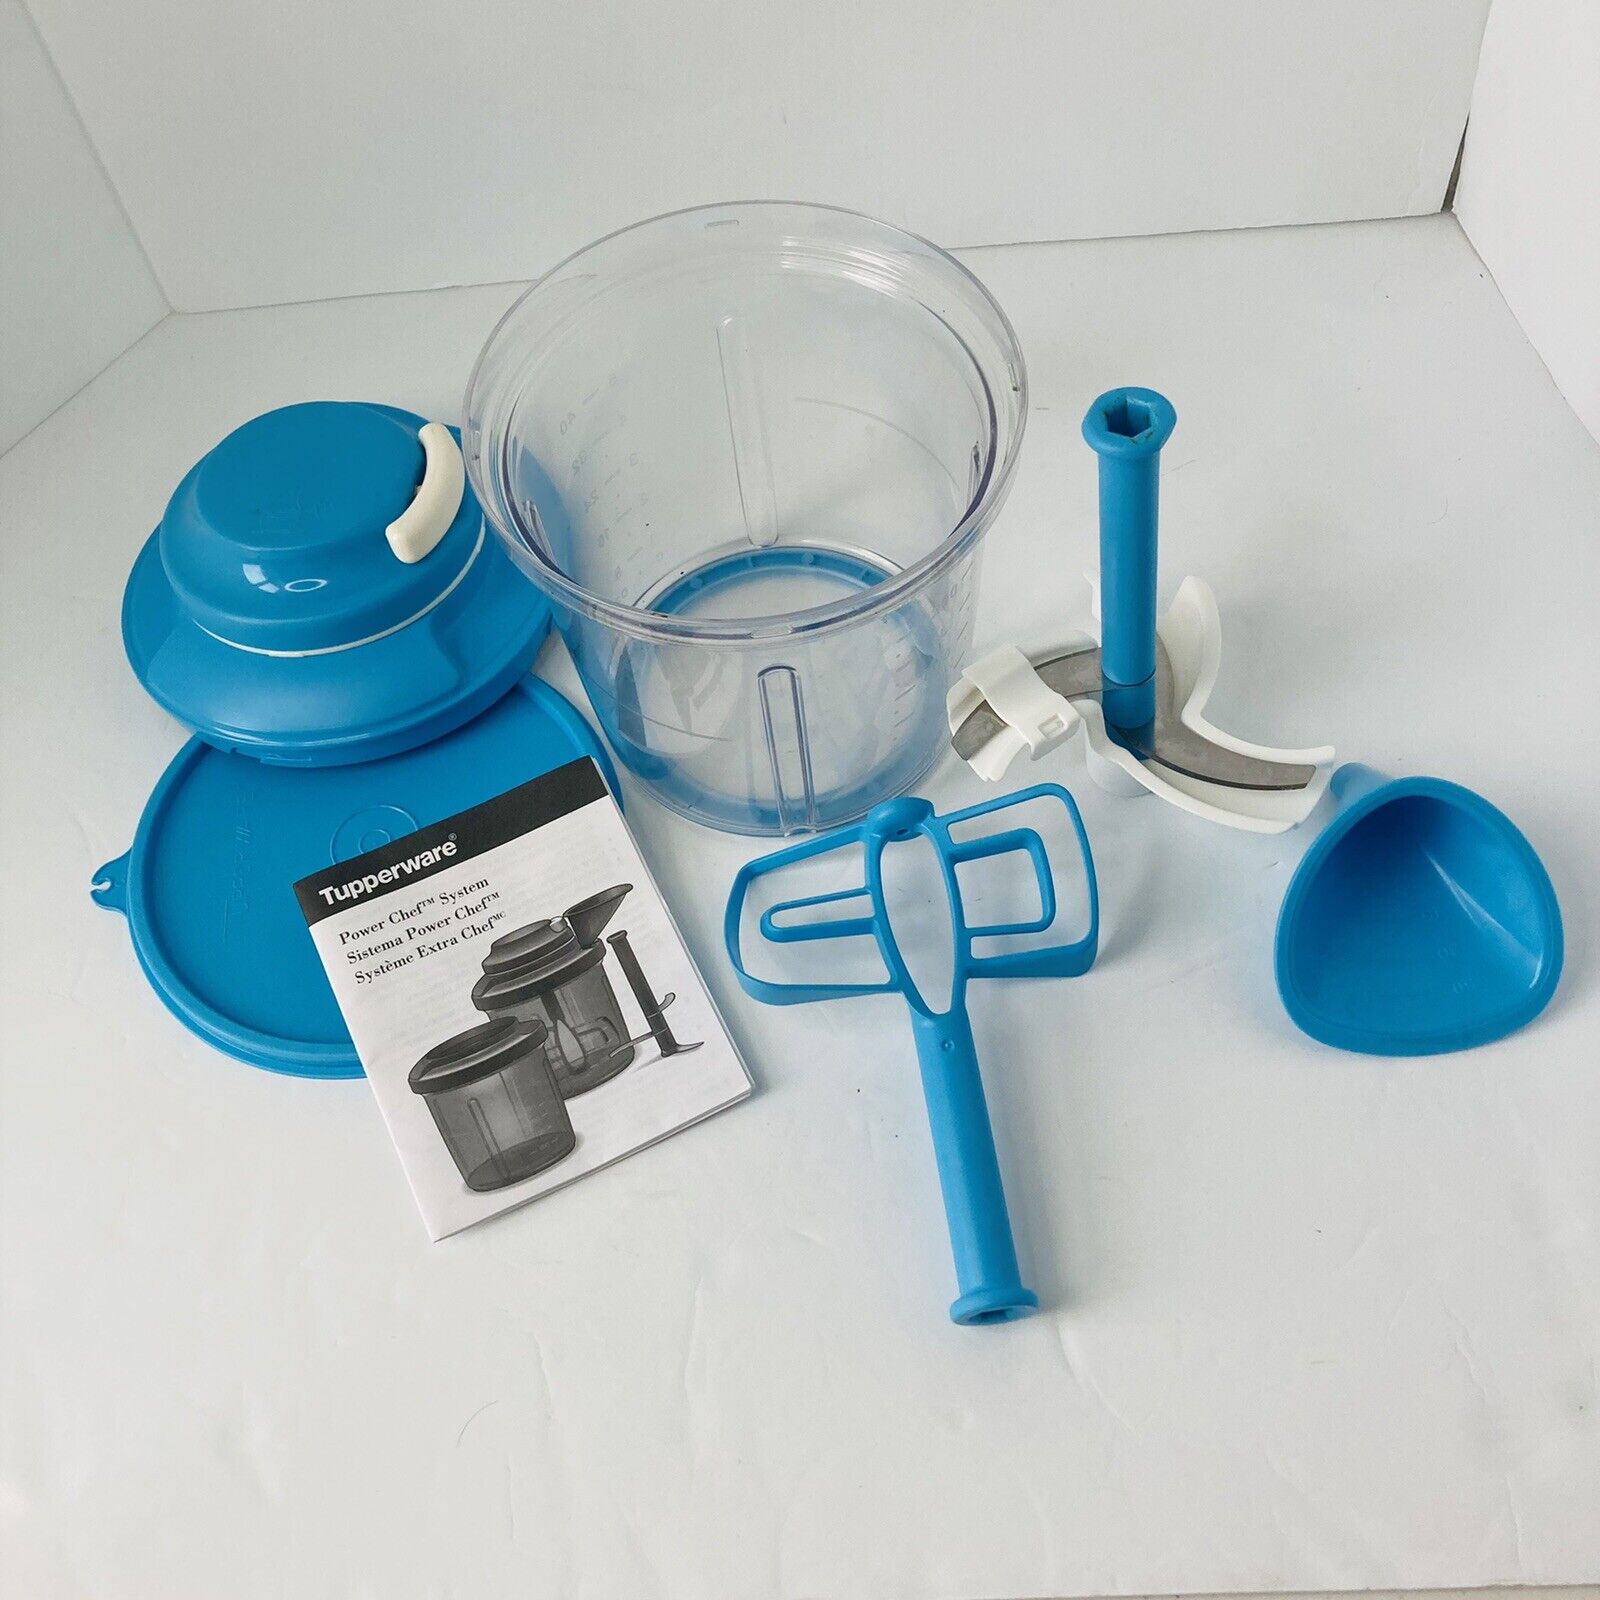 Tupperware Power Chef Supersonic Chopper System Processor Large Blue New